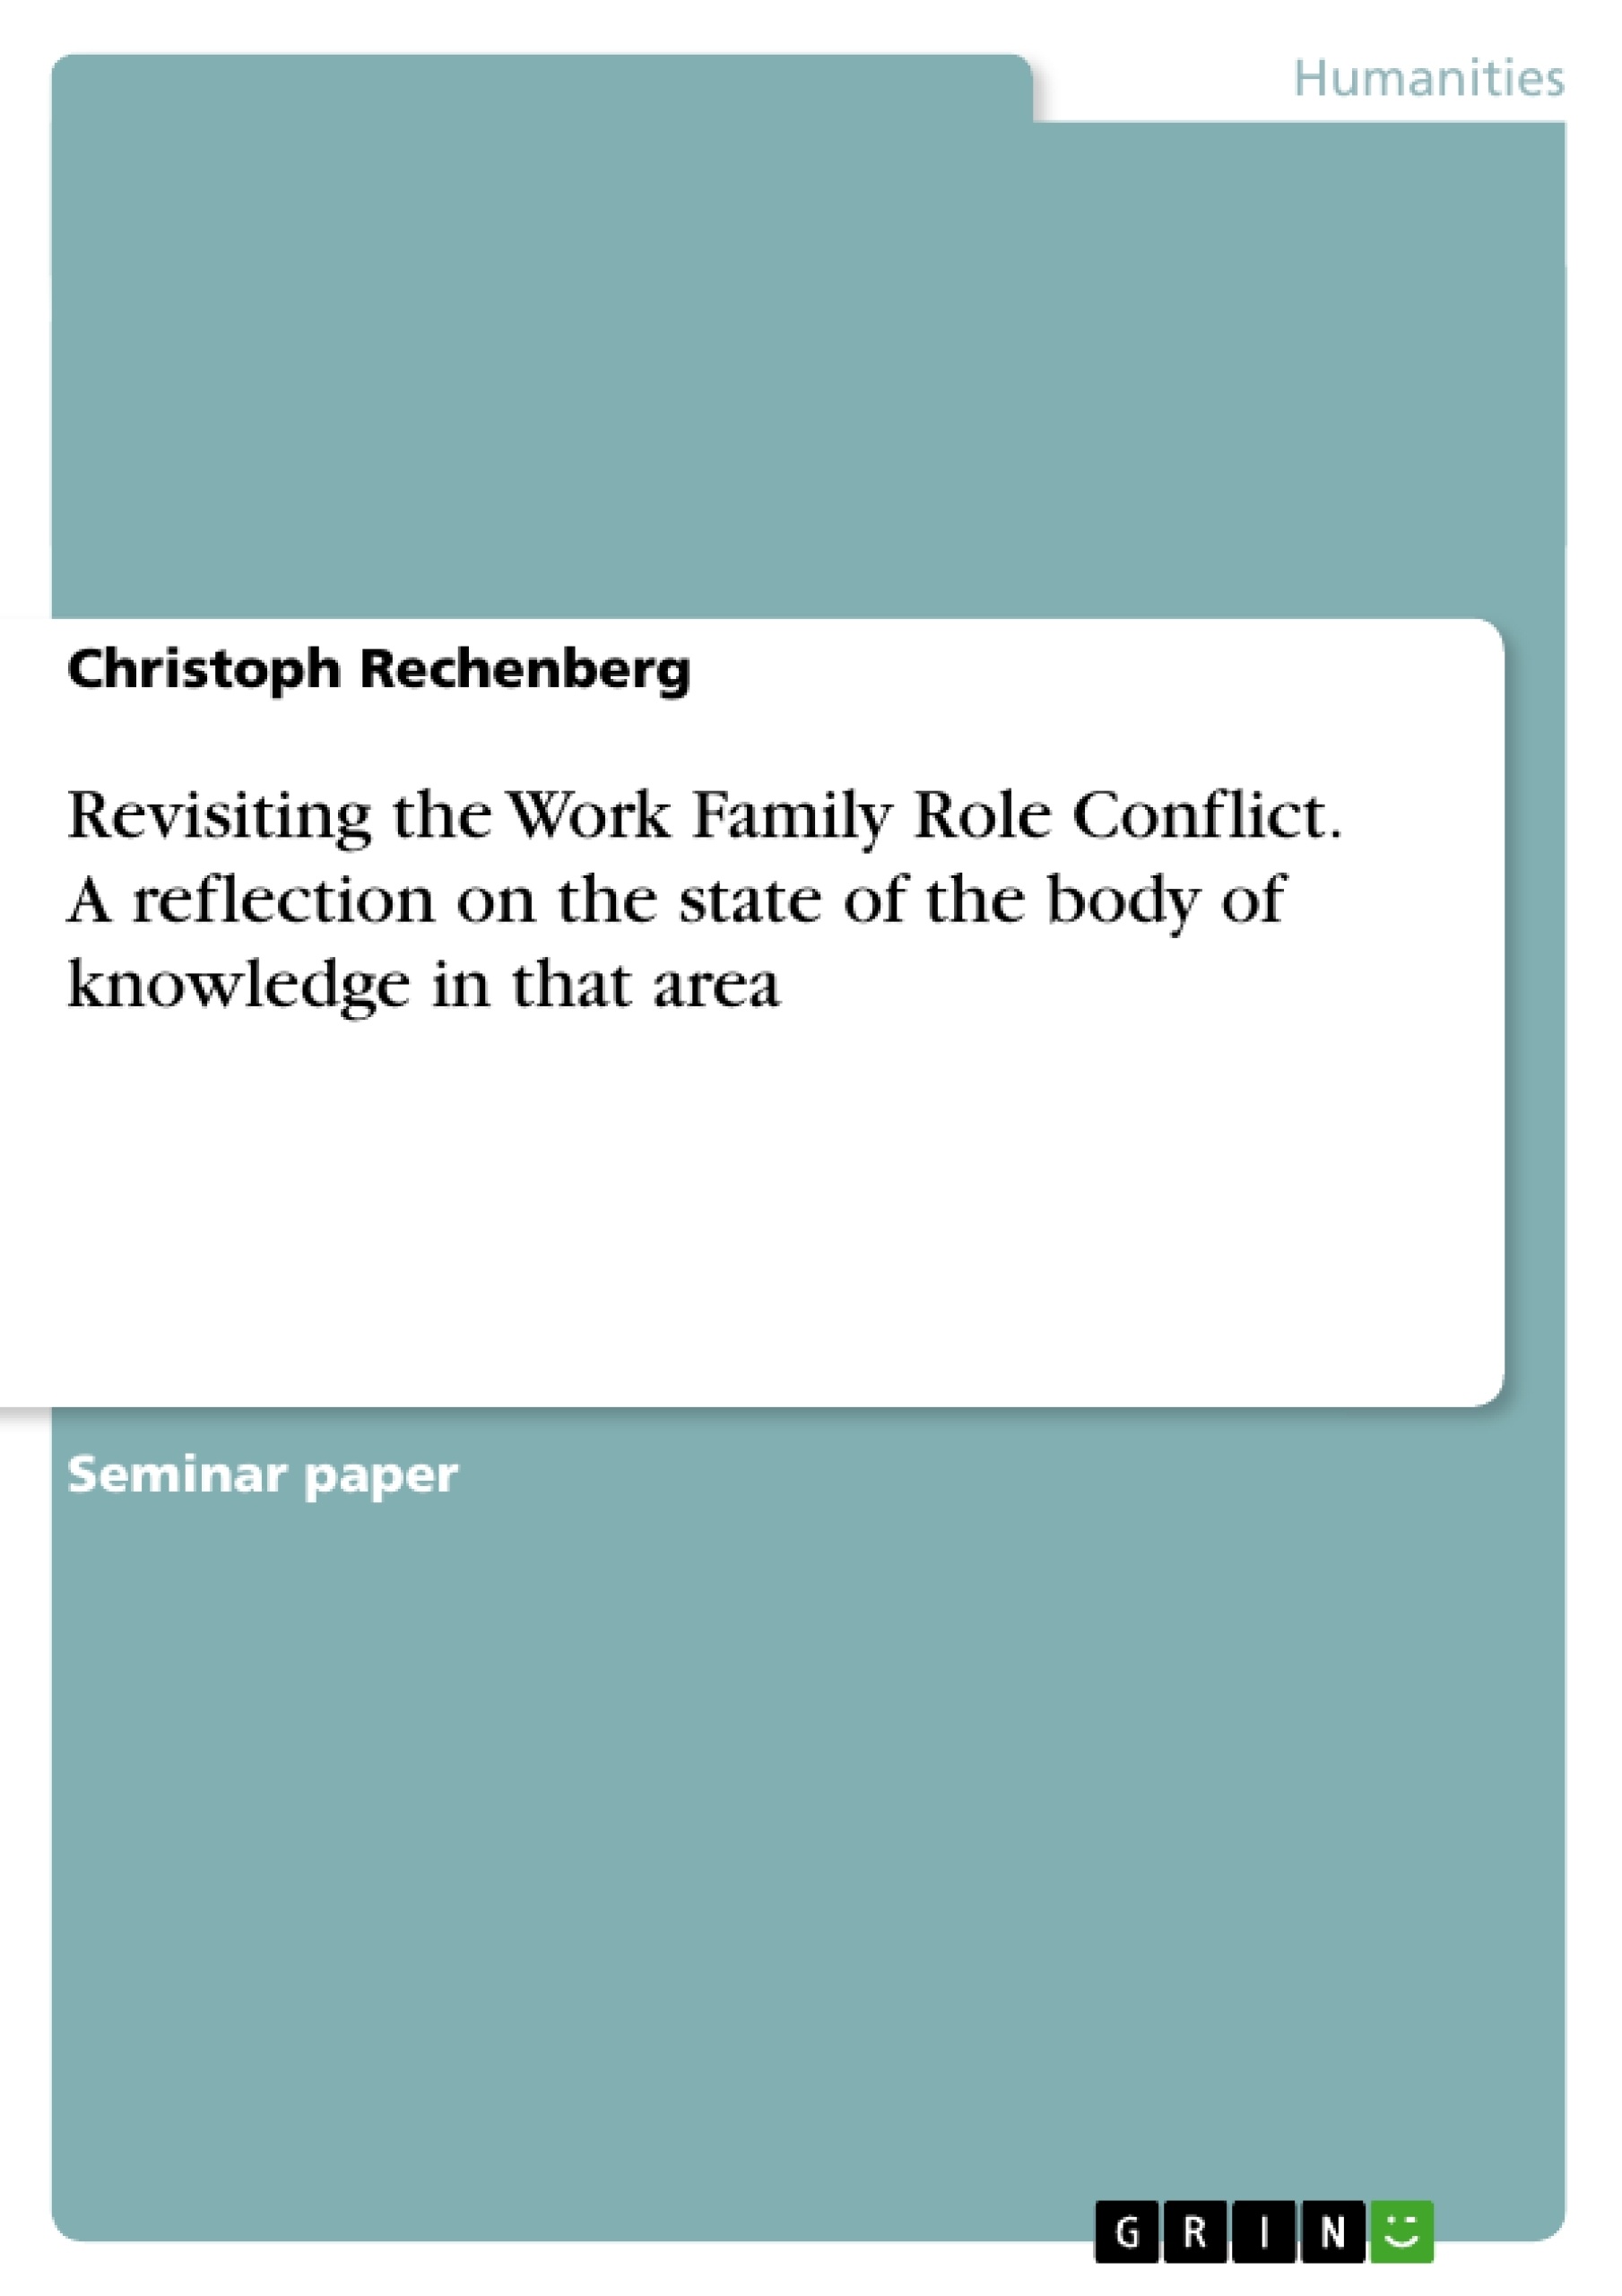 Título: Revisiting the Work Family Role Conflict. A reflection on the state of the body of knowledge in that area